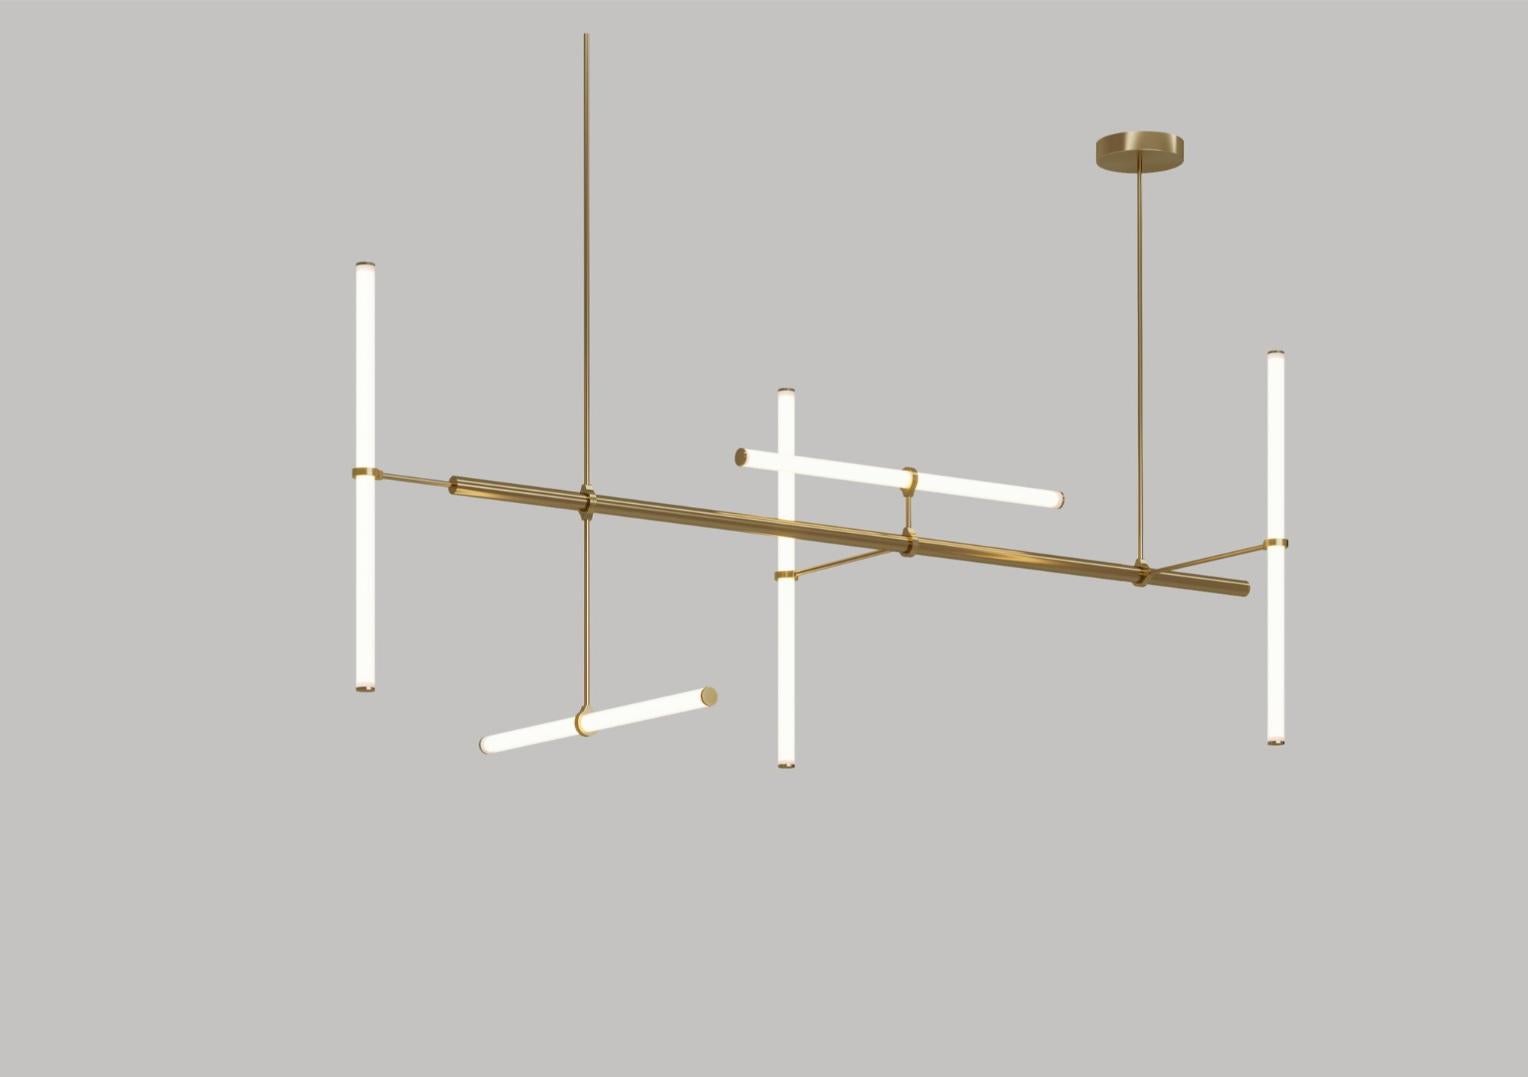 Natural brass light object 023 by Naama Hofman.
Dimensions: D 83 x W 224 x H 83 cm.
Canopy: D 21 cm x H 4.6 cm.
Material: Brass, acrylic tube, LED lights.

The height of this light object can be customized and made to order. Please contact